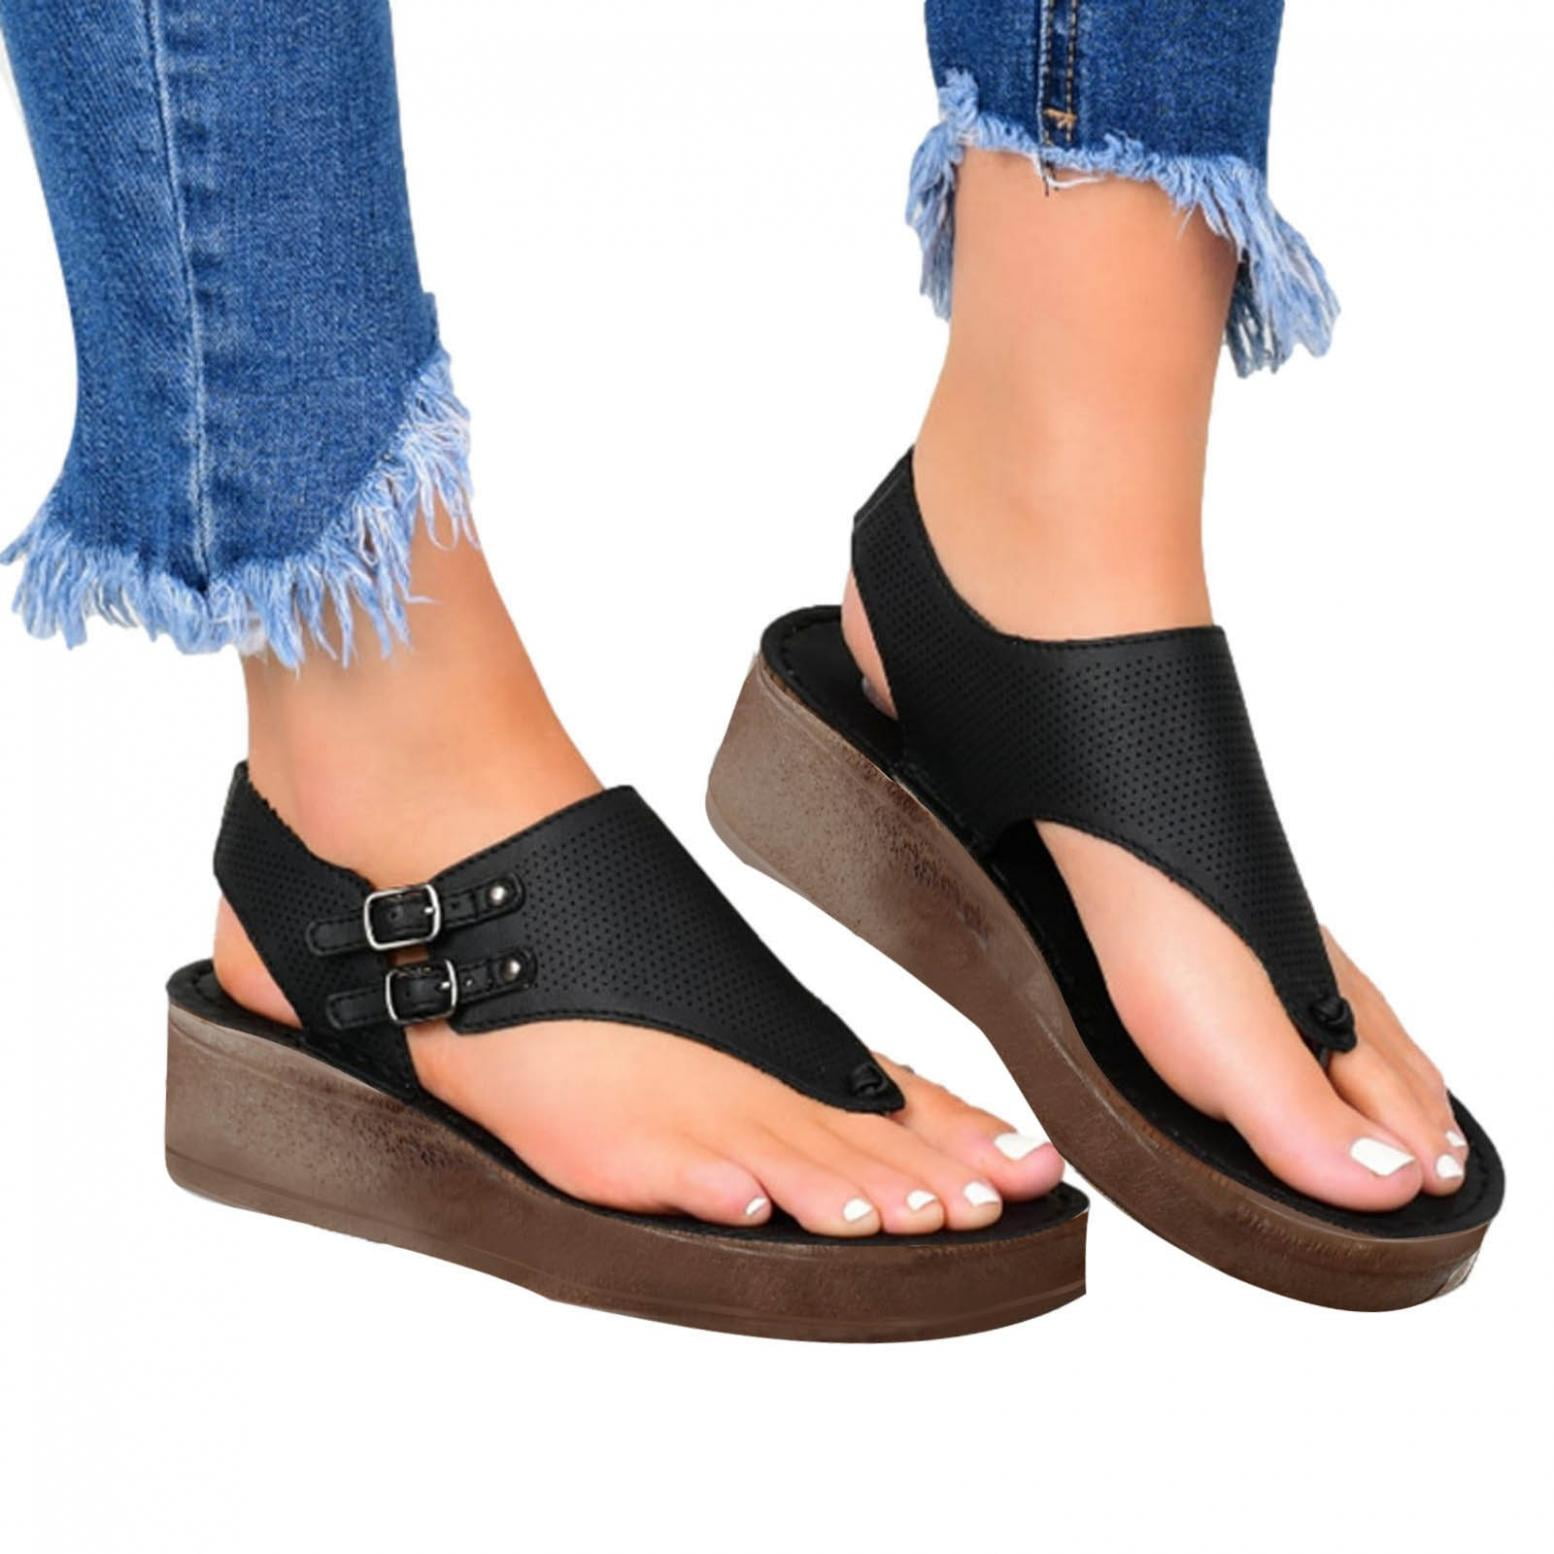 2019 Women Summer Beach Sandal Hollow-out Shoes Casual Breathable Slippers Flats